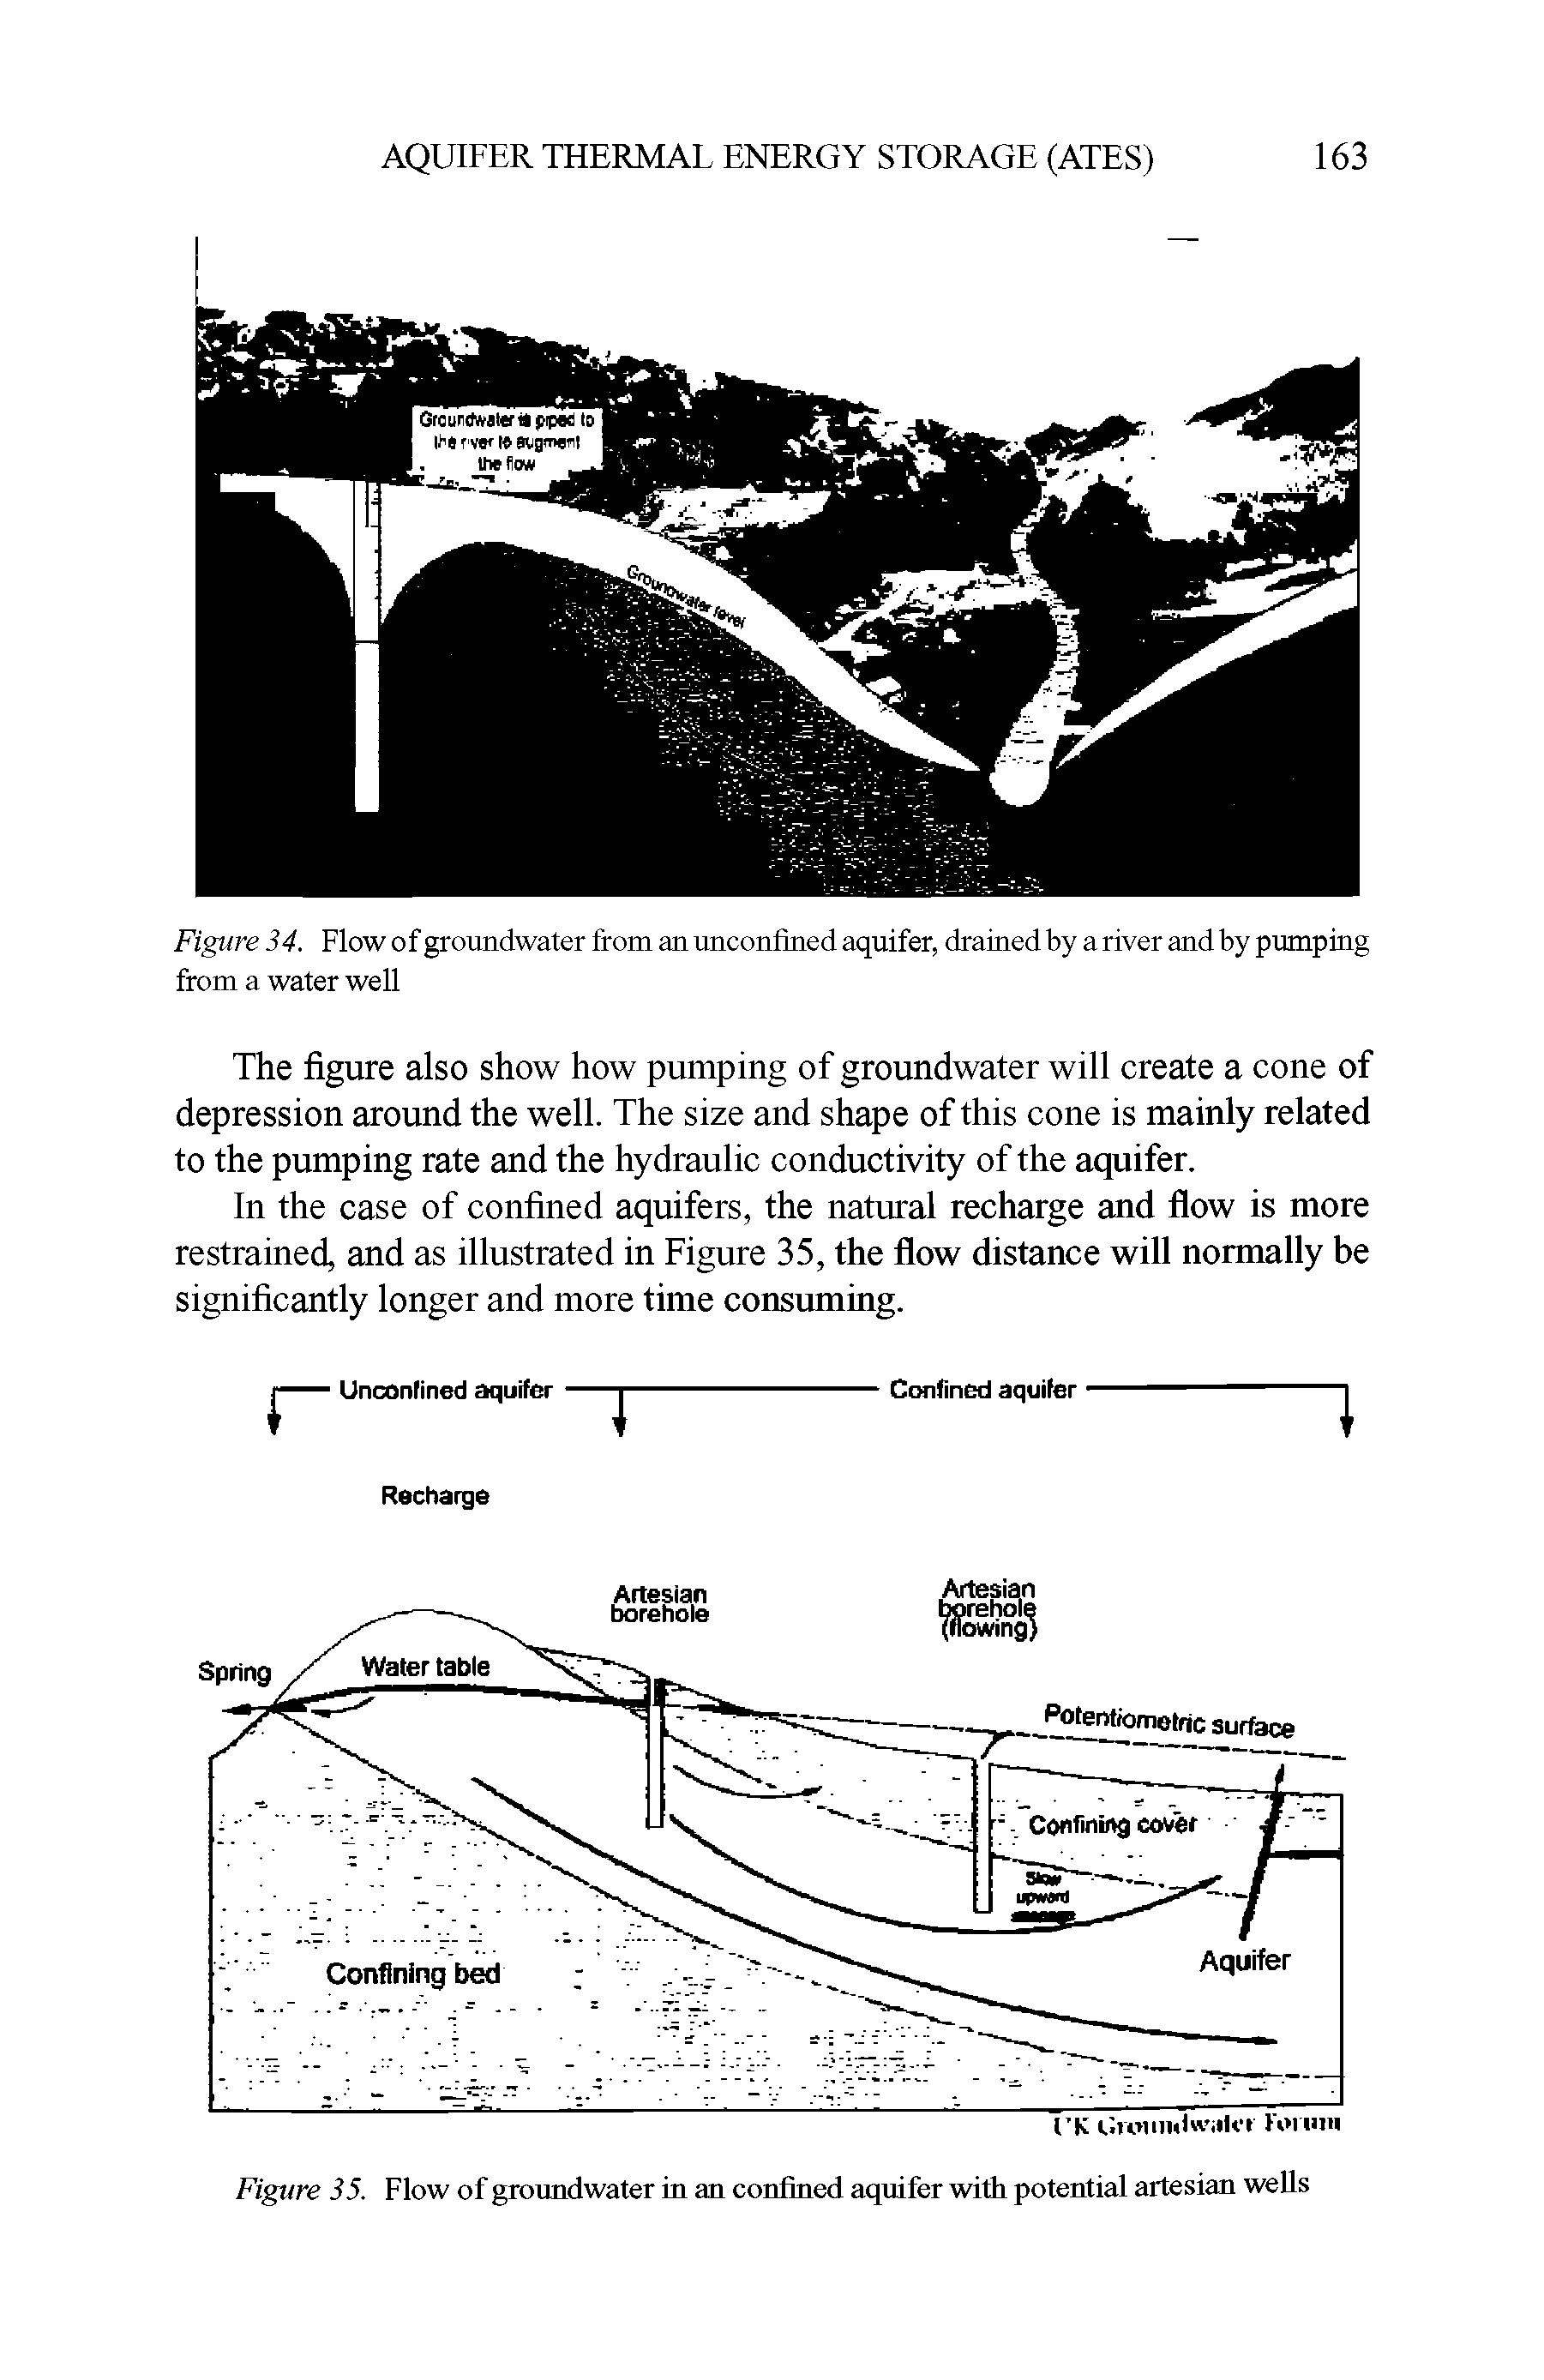 Figure 34. Flow of groundwater from an unconfined aquifer, drained by a river and by pumping from a water well...